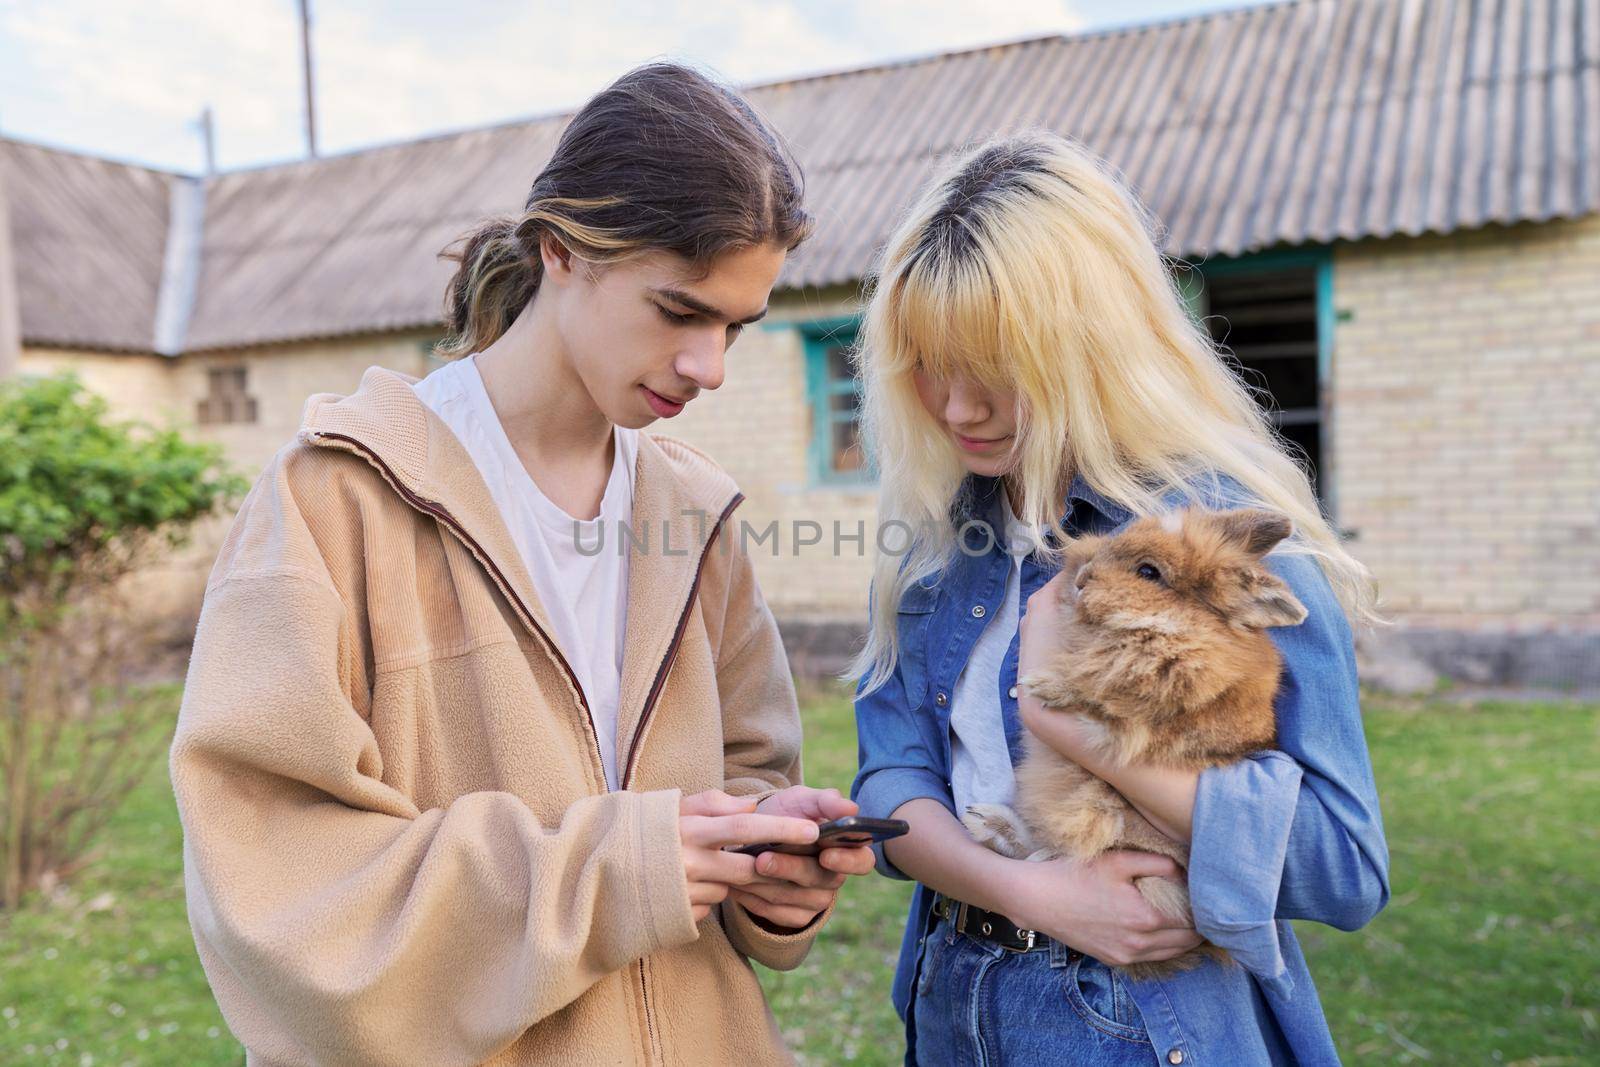 Teenagers guy and girl with decorative rabbit in their hands talking and looking at smartphone screen, on rural farm, spring blooming garden background, countryside, domestic animals